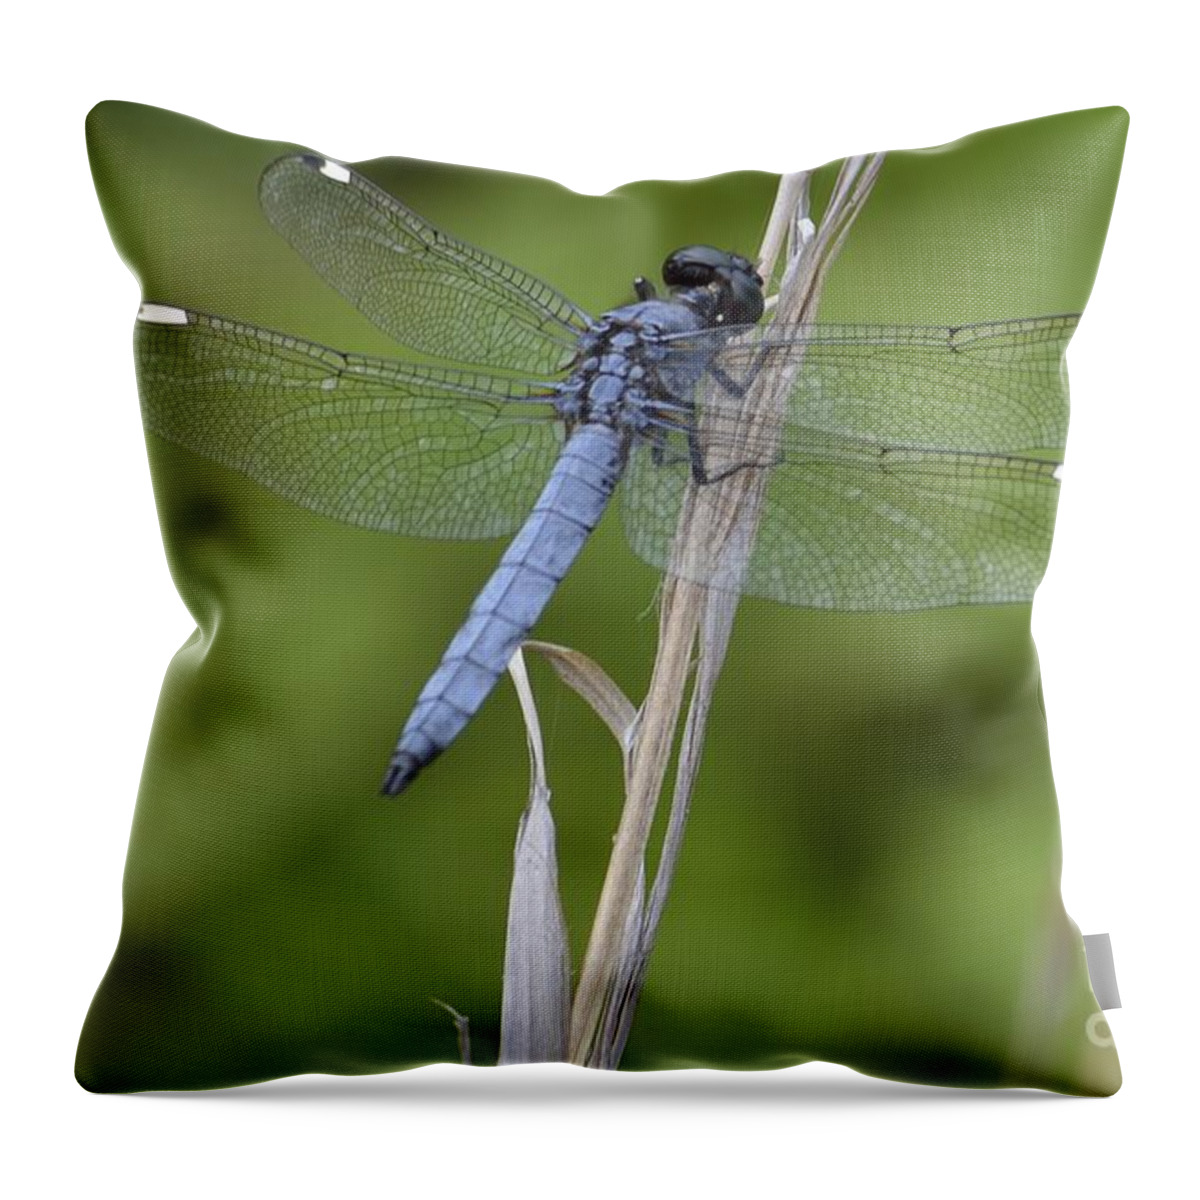 Blue Throw Pillow featuring the photograph Spangled Skimmer by Randy Bodkins